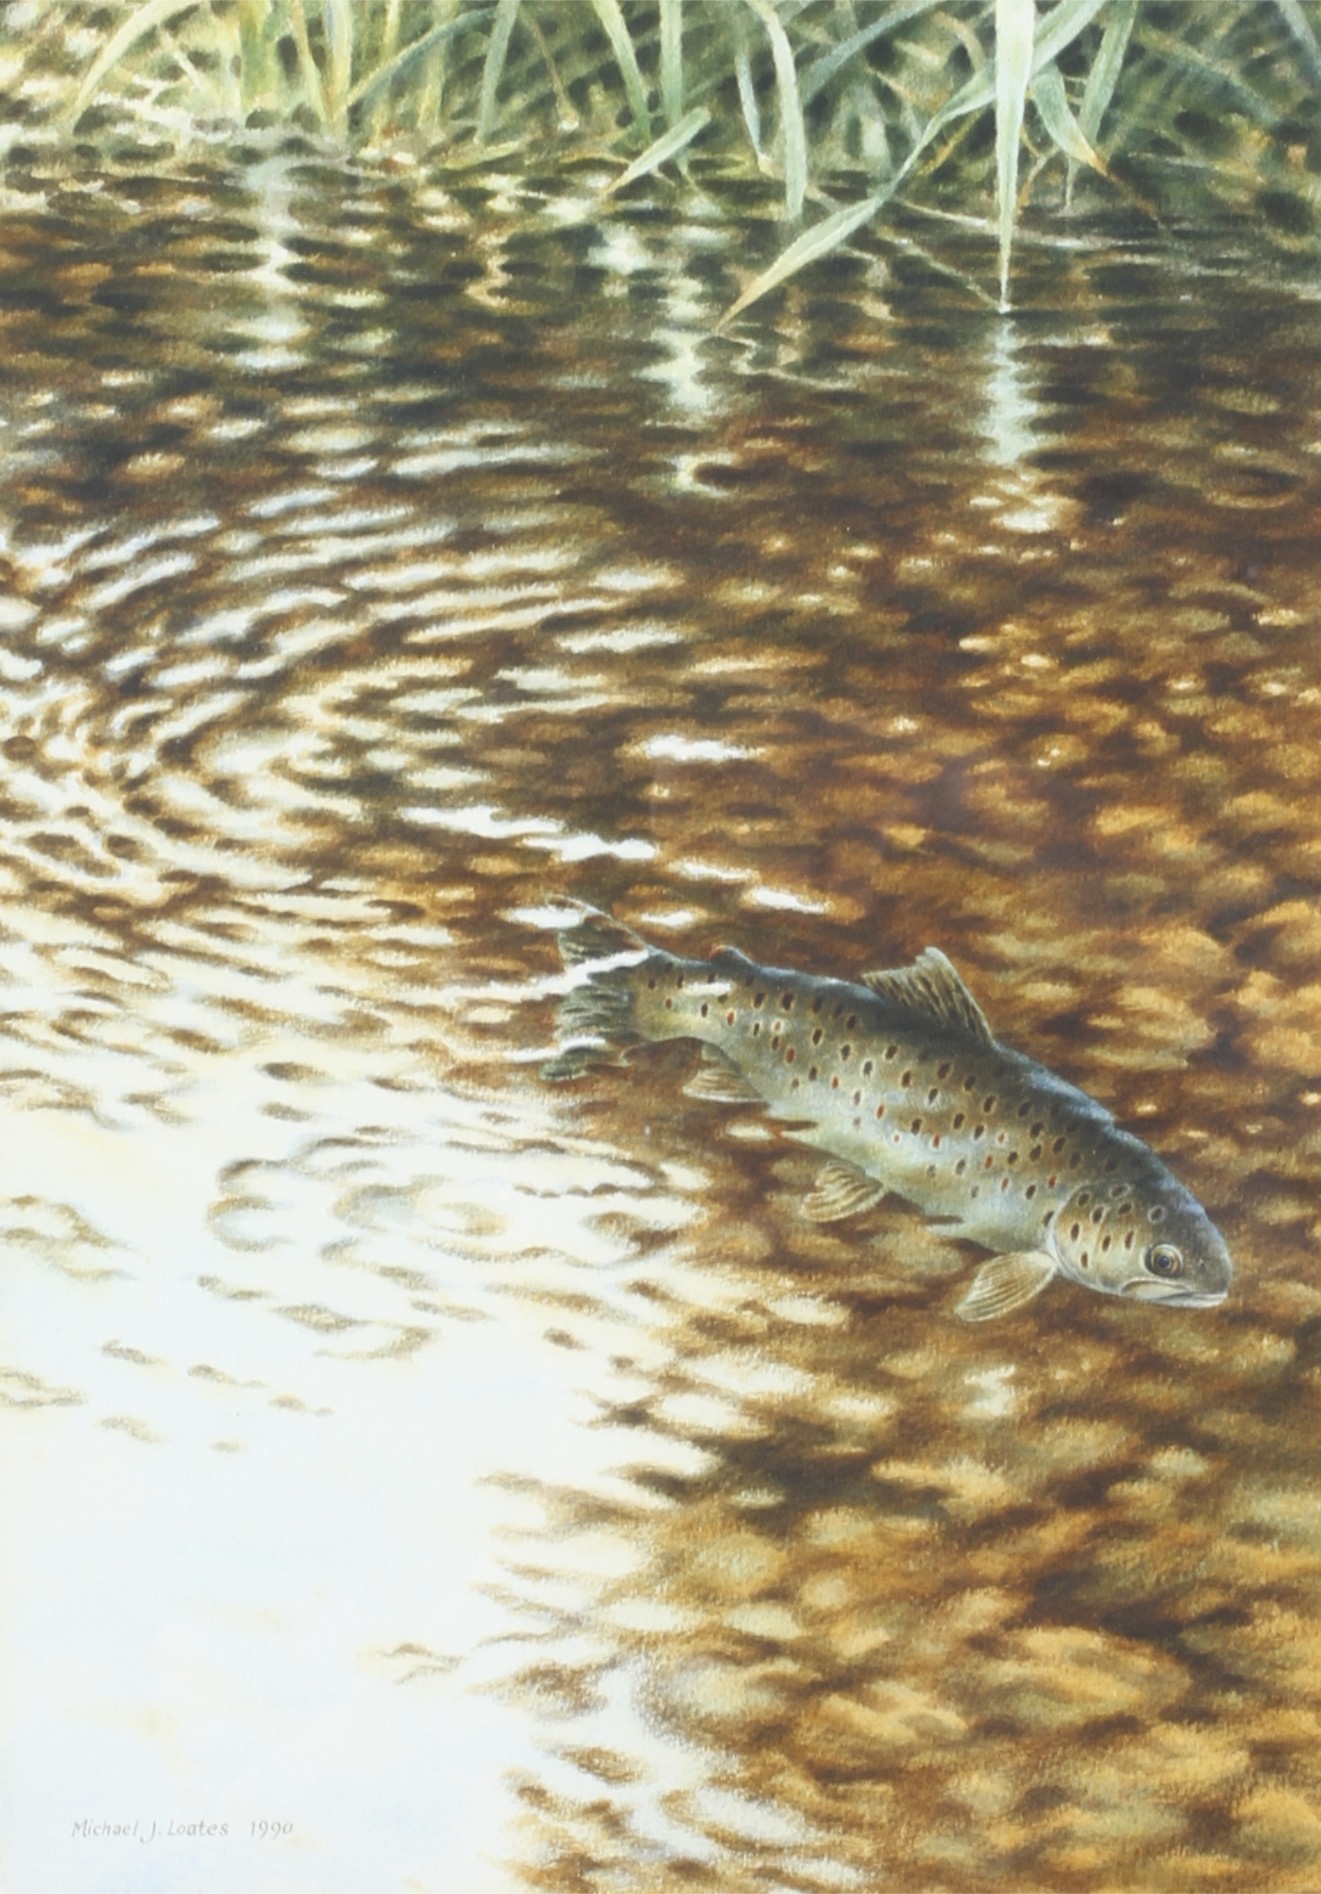 Michael J Loates (1947) watercolour, Brown Trout swimming in a chalk stream/river.